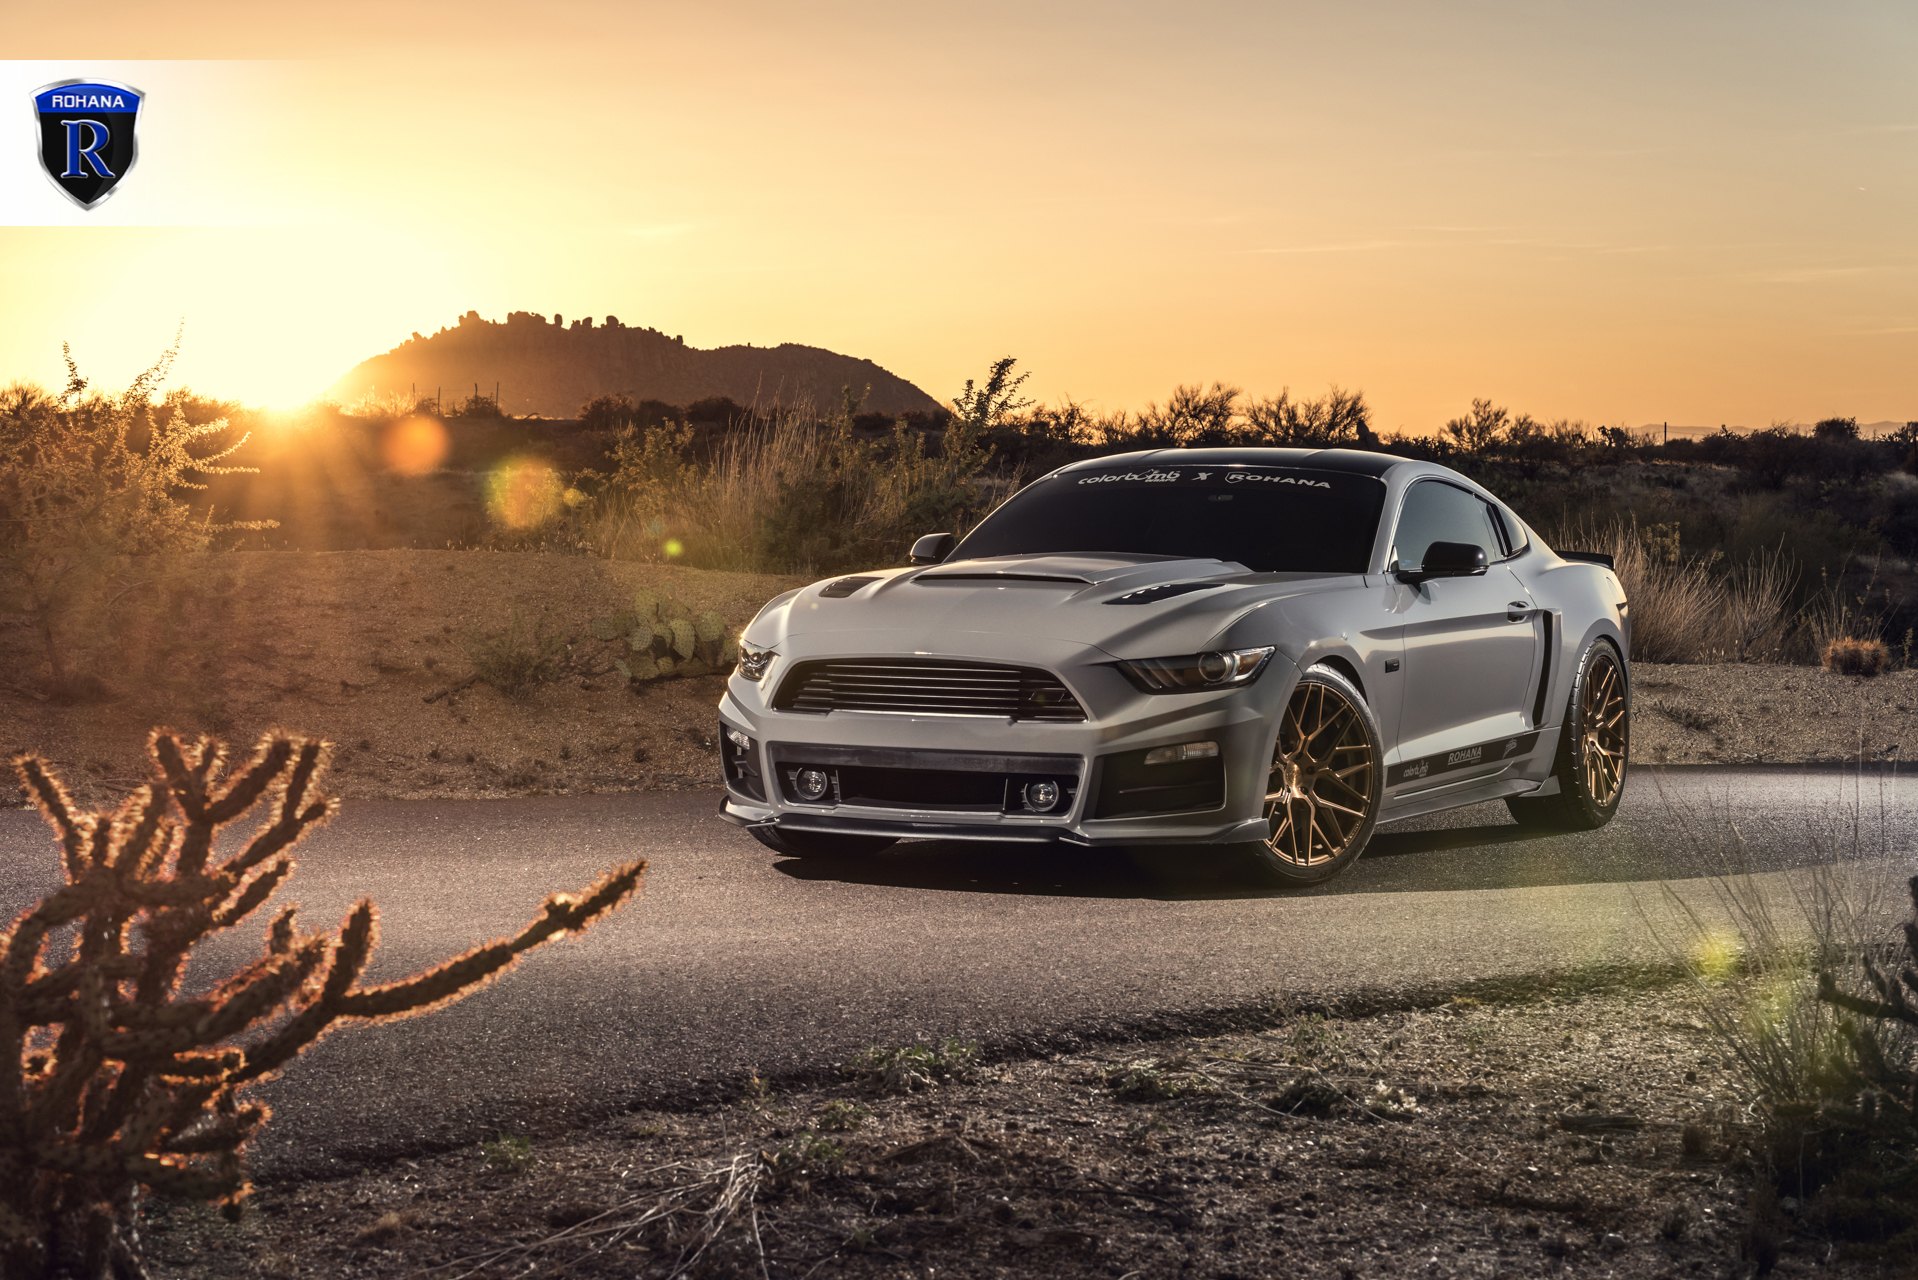 Custom Hood with Air Vents on Gray Ford Mustang - Photo by Rohana Wheels